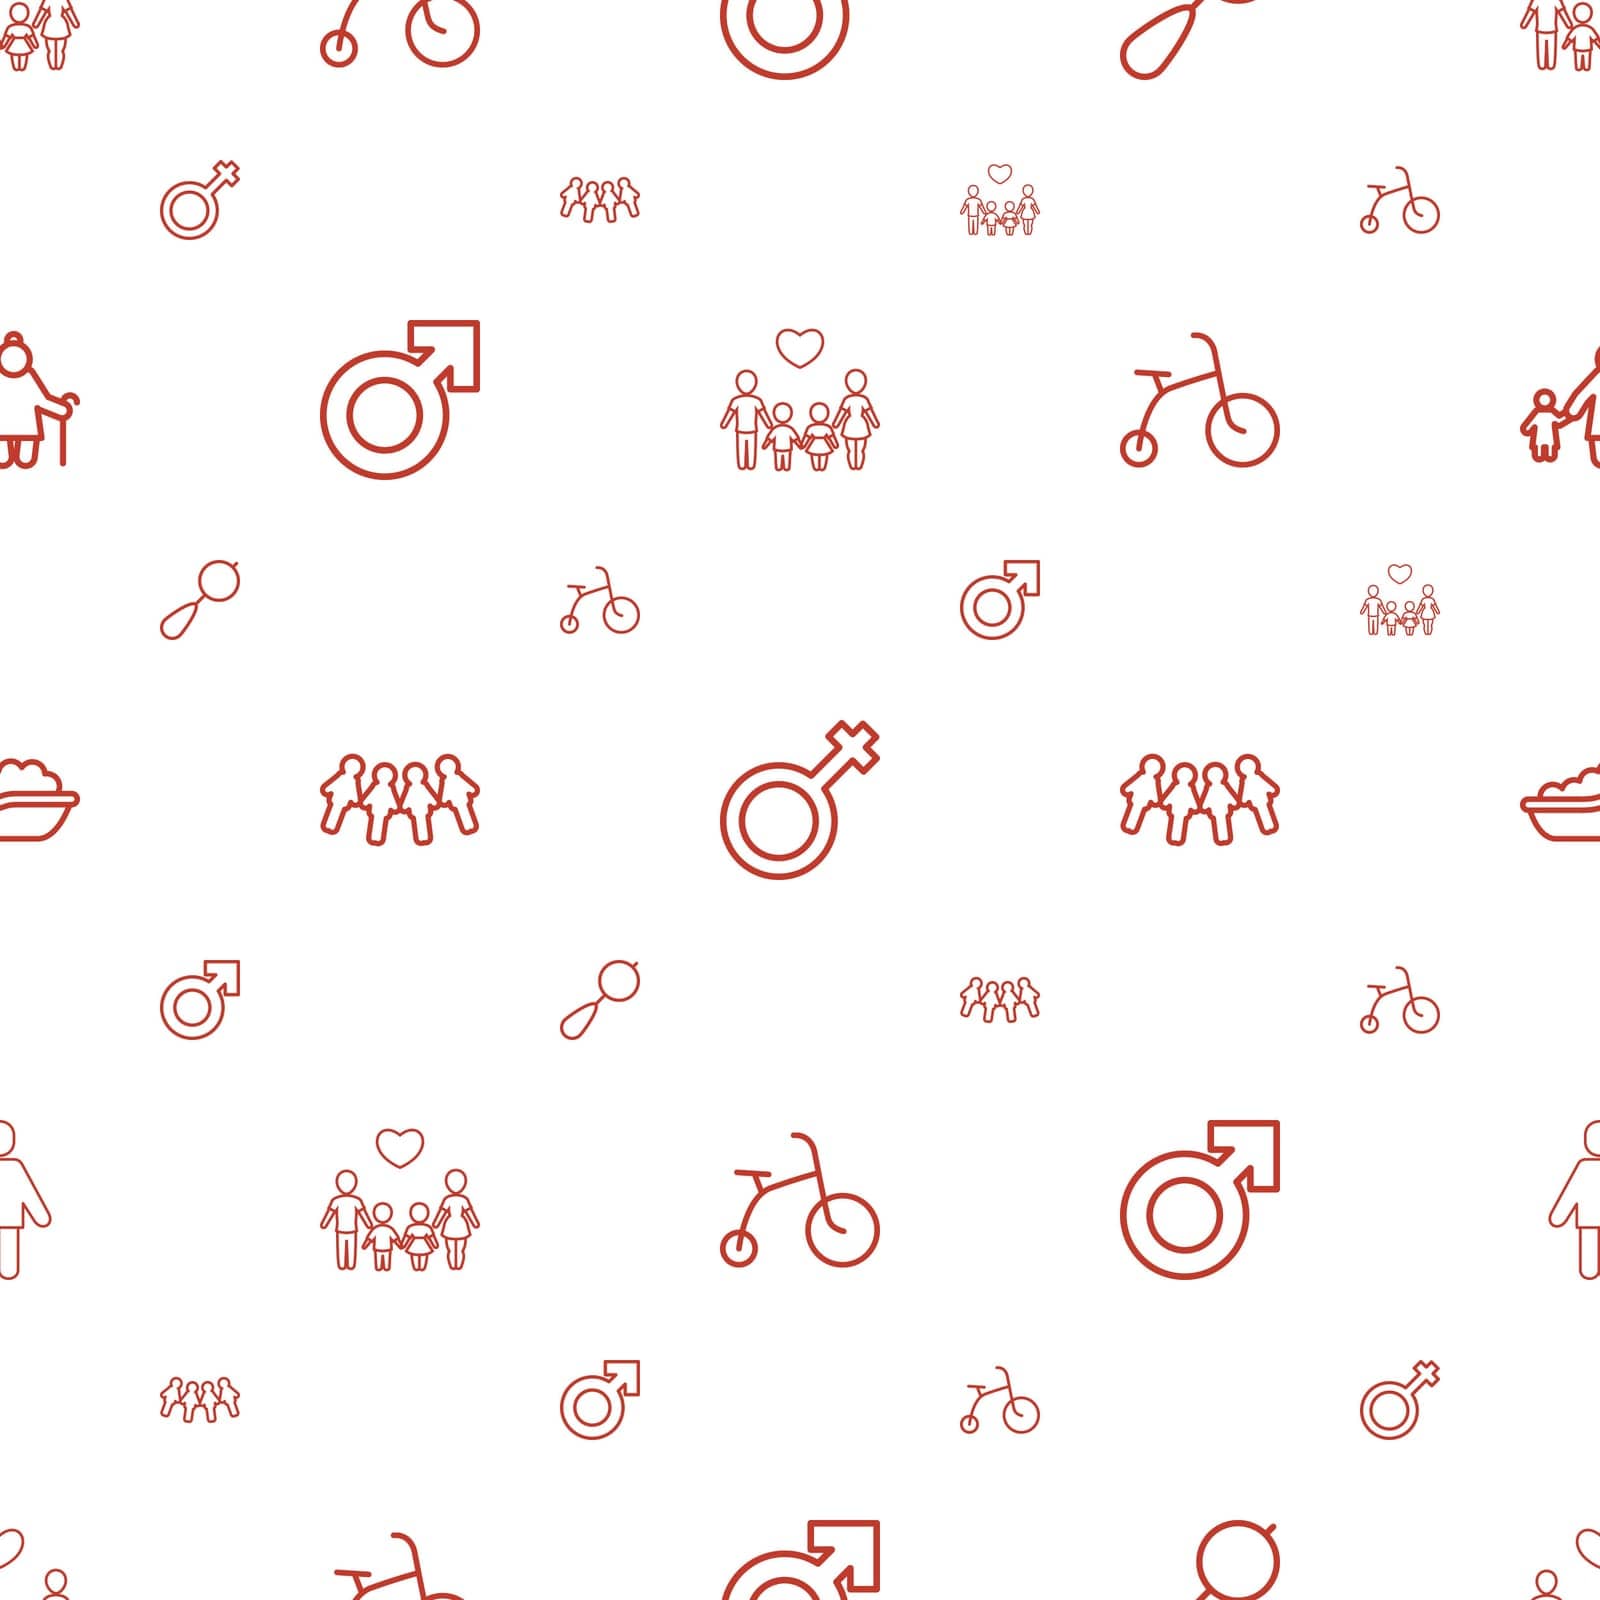 love,symbol,woman,gender,bicycle,happy,kid,concept,pattern,icon,sign,isolated,boy,cute,white,children,and,design,vector,man,female,human,bath,graphic,beanbag,element,shape,childhood,old,abstract,girl,people,background,baby,illustration,family,male,sexual,child